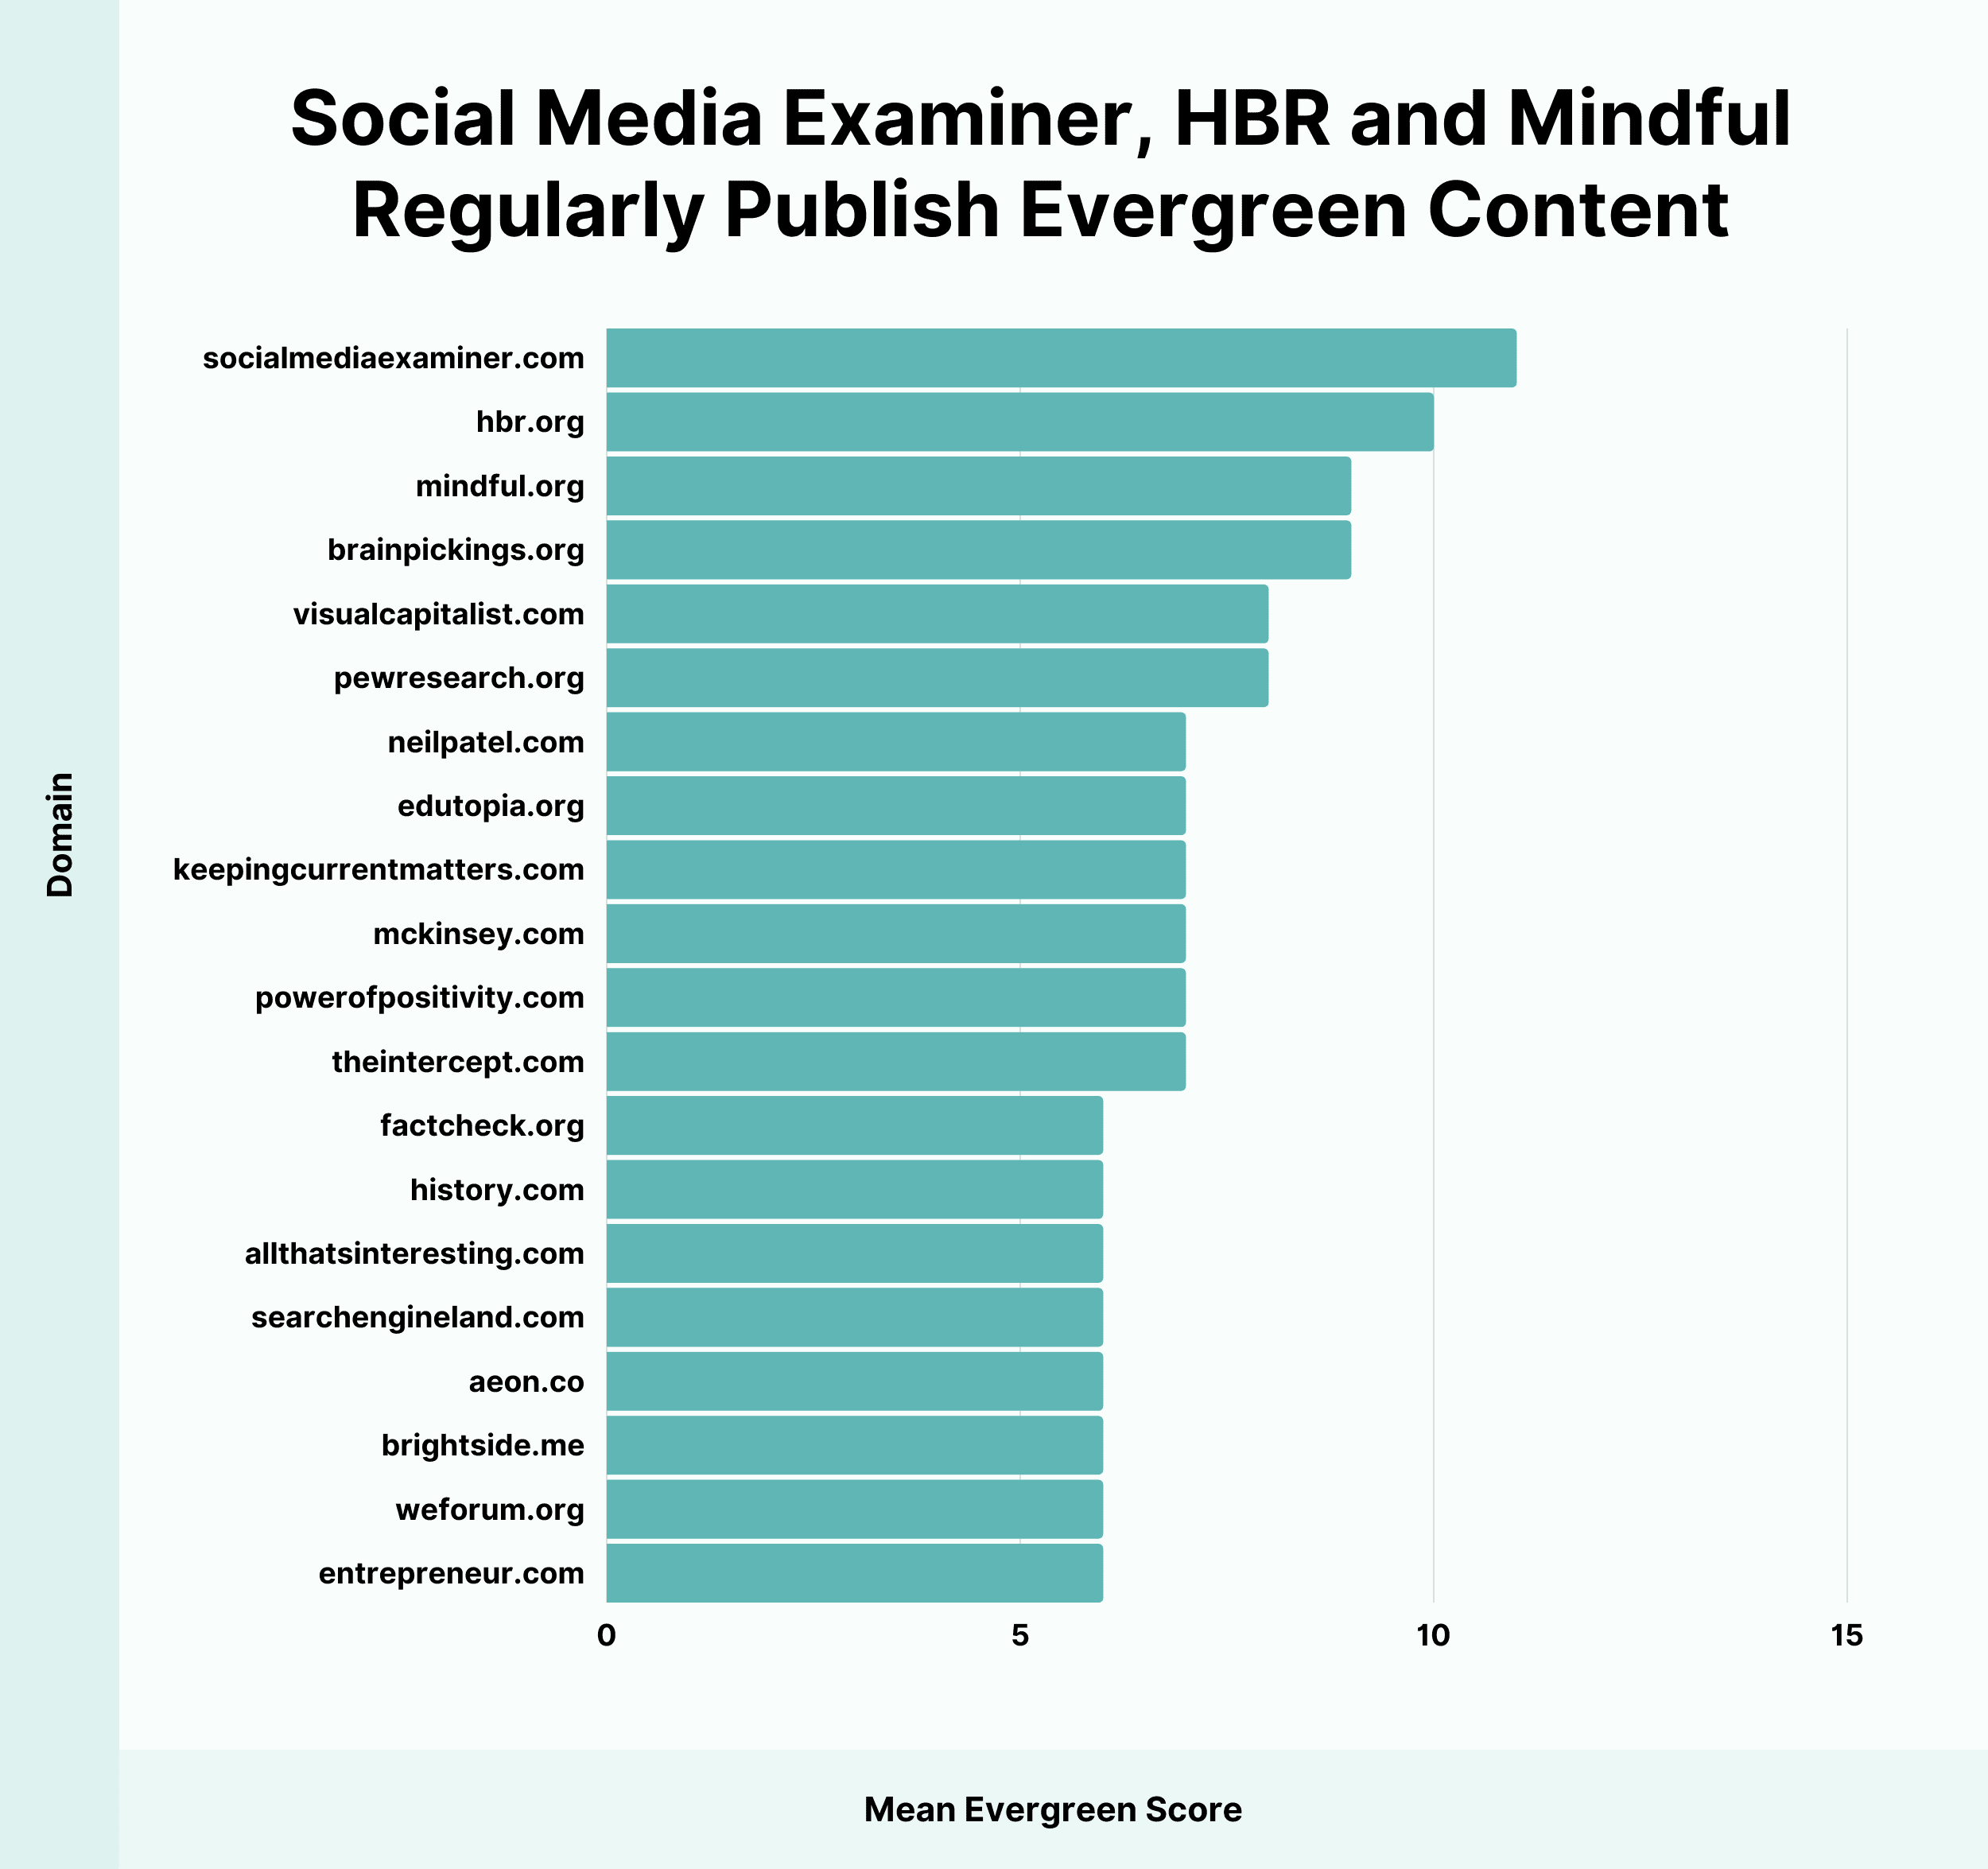 Social Media Examiner, HBR and mindful regularly publish evergreen content